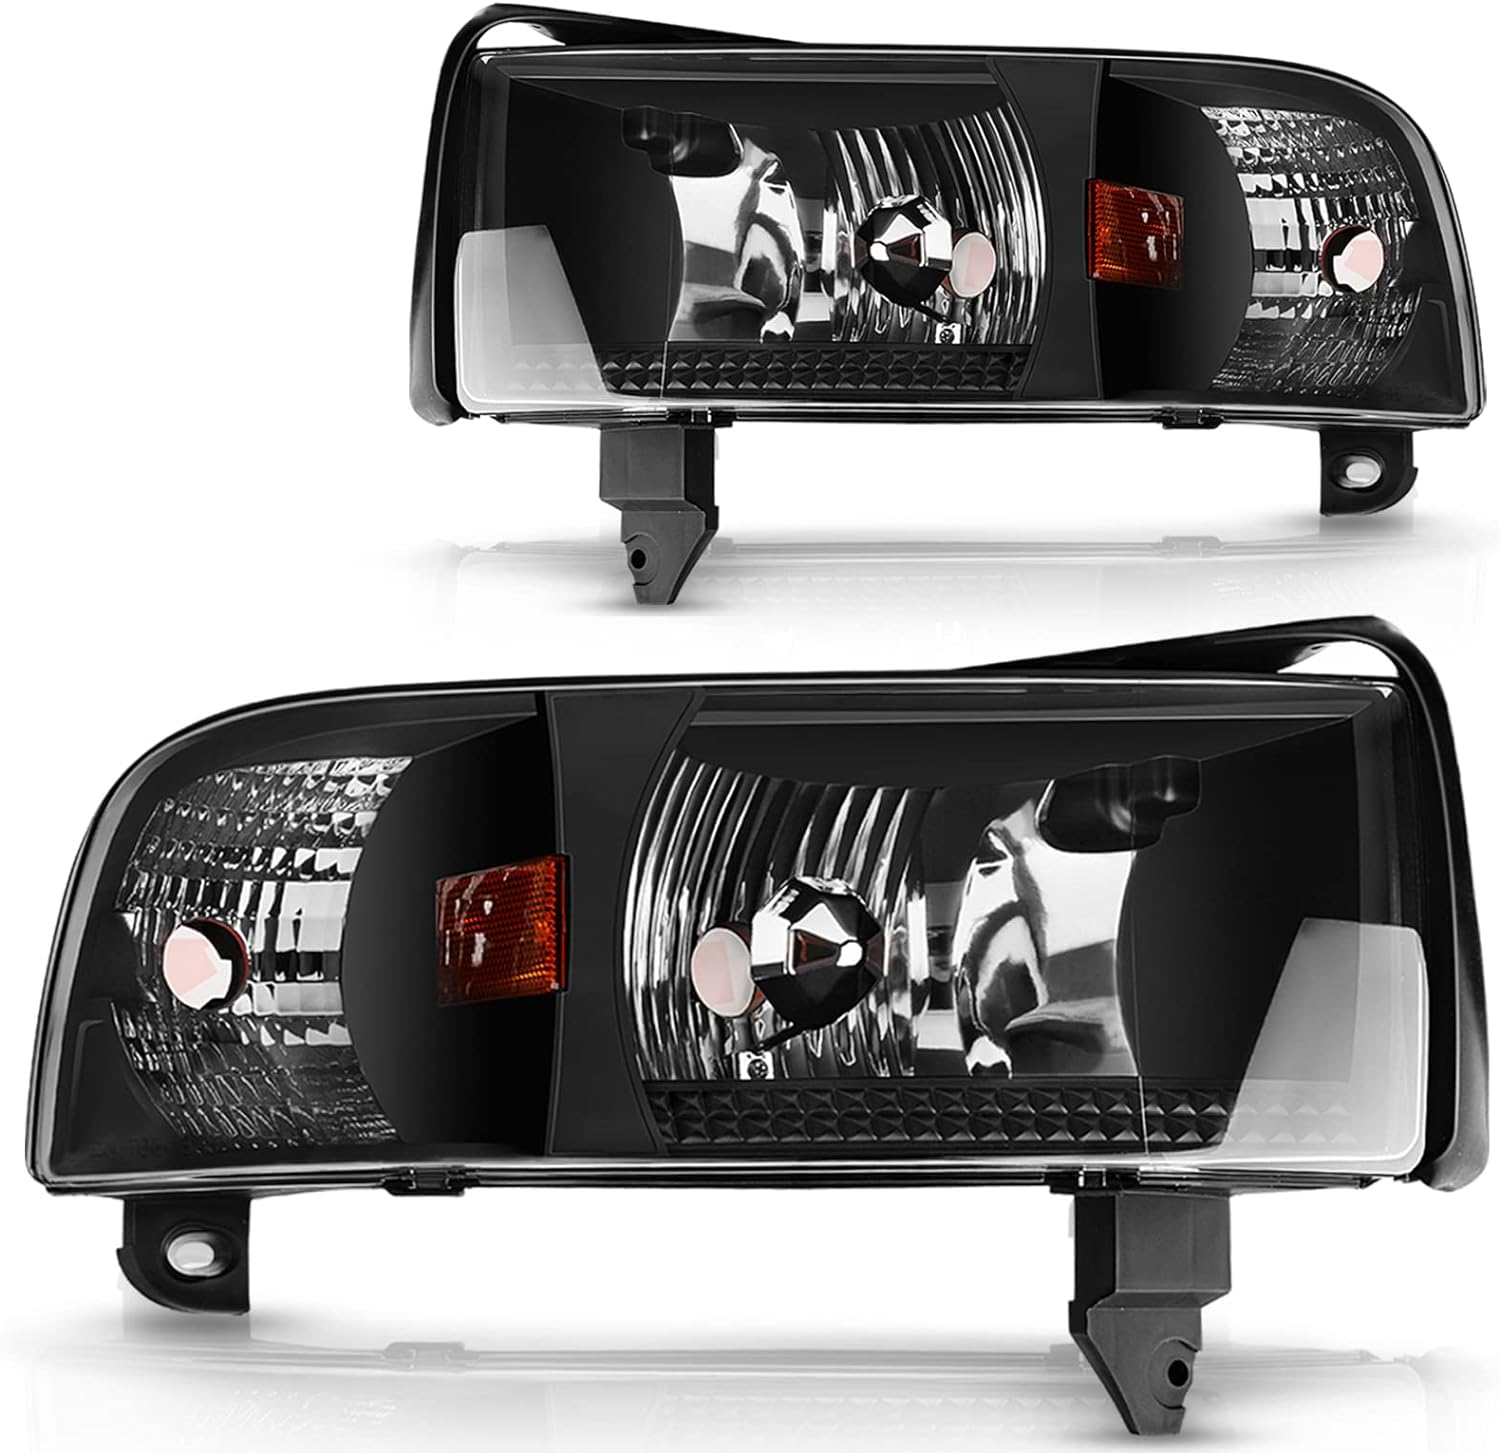 DWVO Headlight Assembly Compatible with 1994-2001 Dodge Ram 1500/94-02 Dodge Ram 2500 3500/95-02 Dodge Ram 4000 Black Housing without DRL